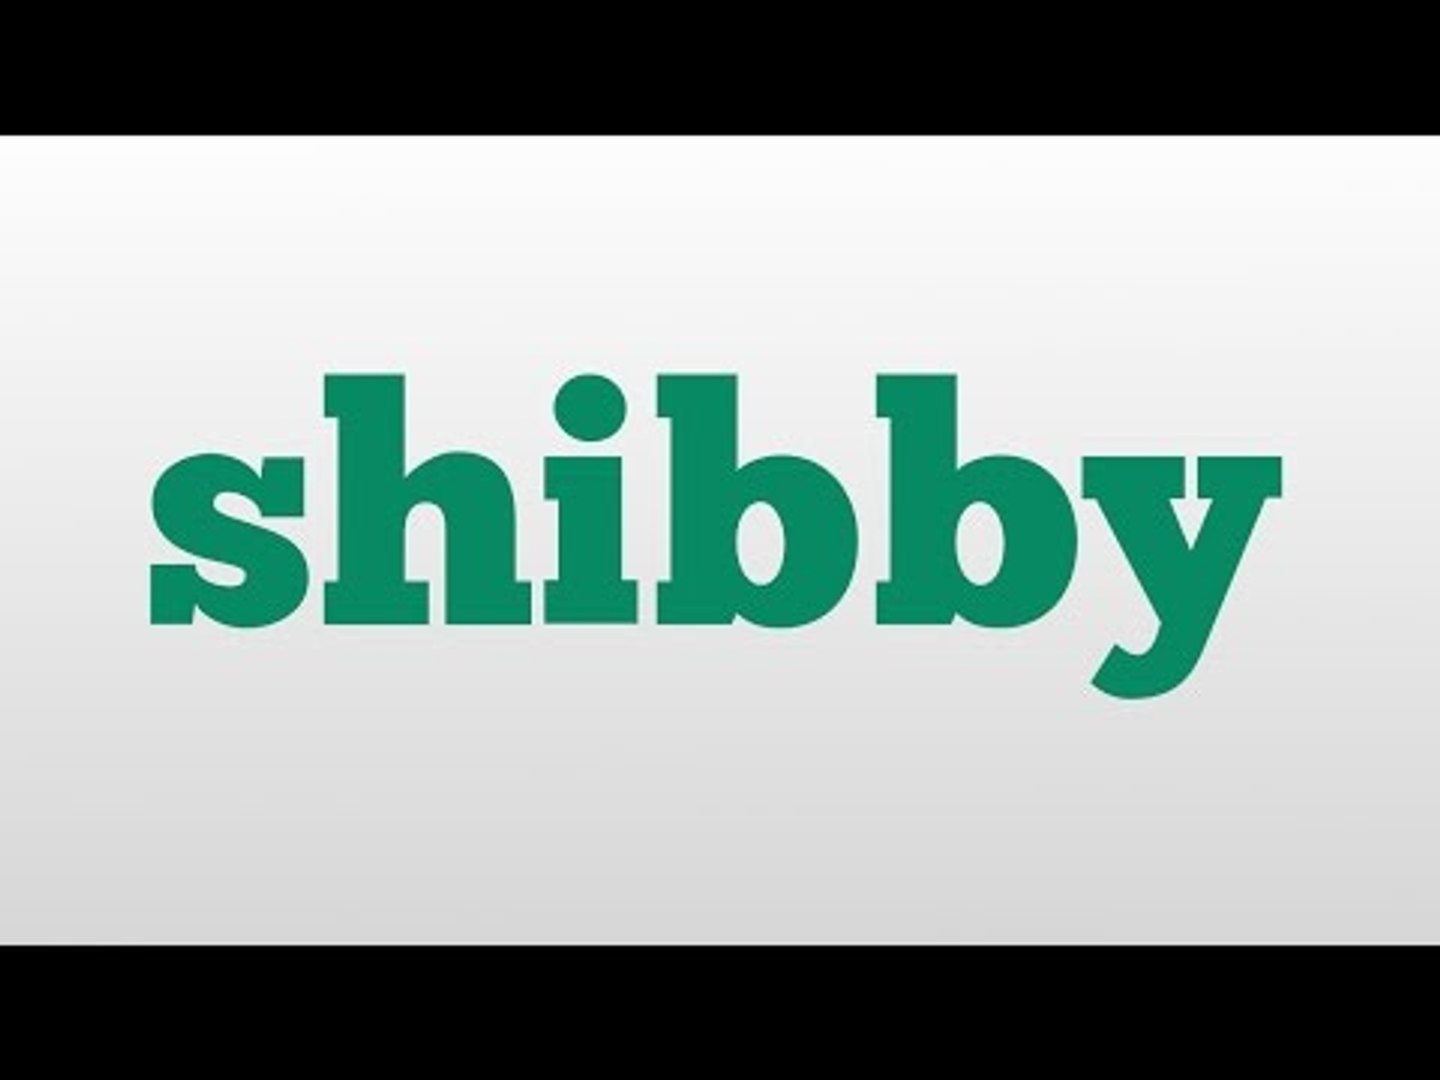 Shibby meaning